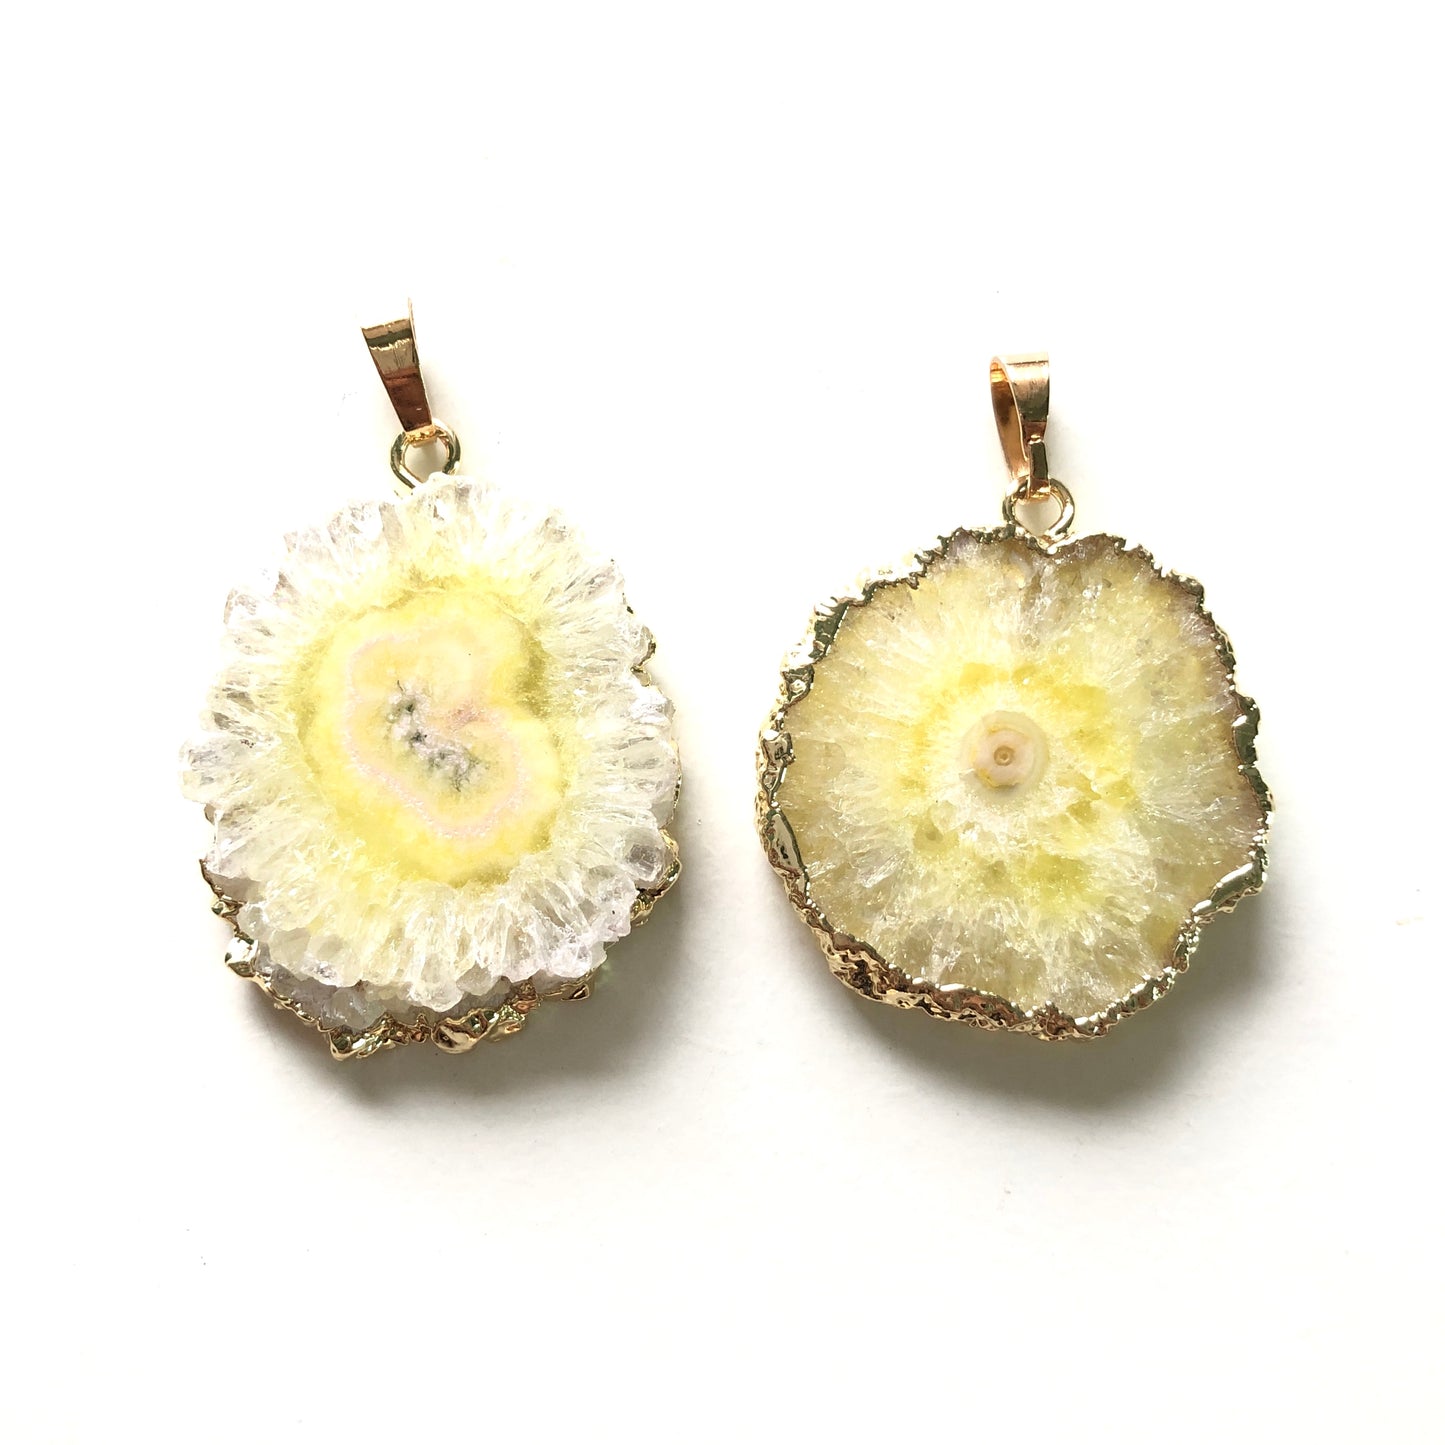 1PC 25-40mm Gold Plated Natural Sunflower Agate Charms-Premium Quality Yellow on Gold Stone Charms Charms Beads Beyond